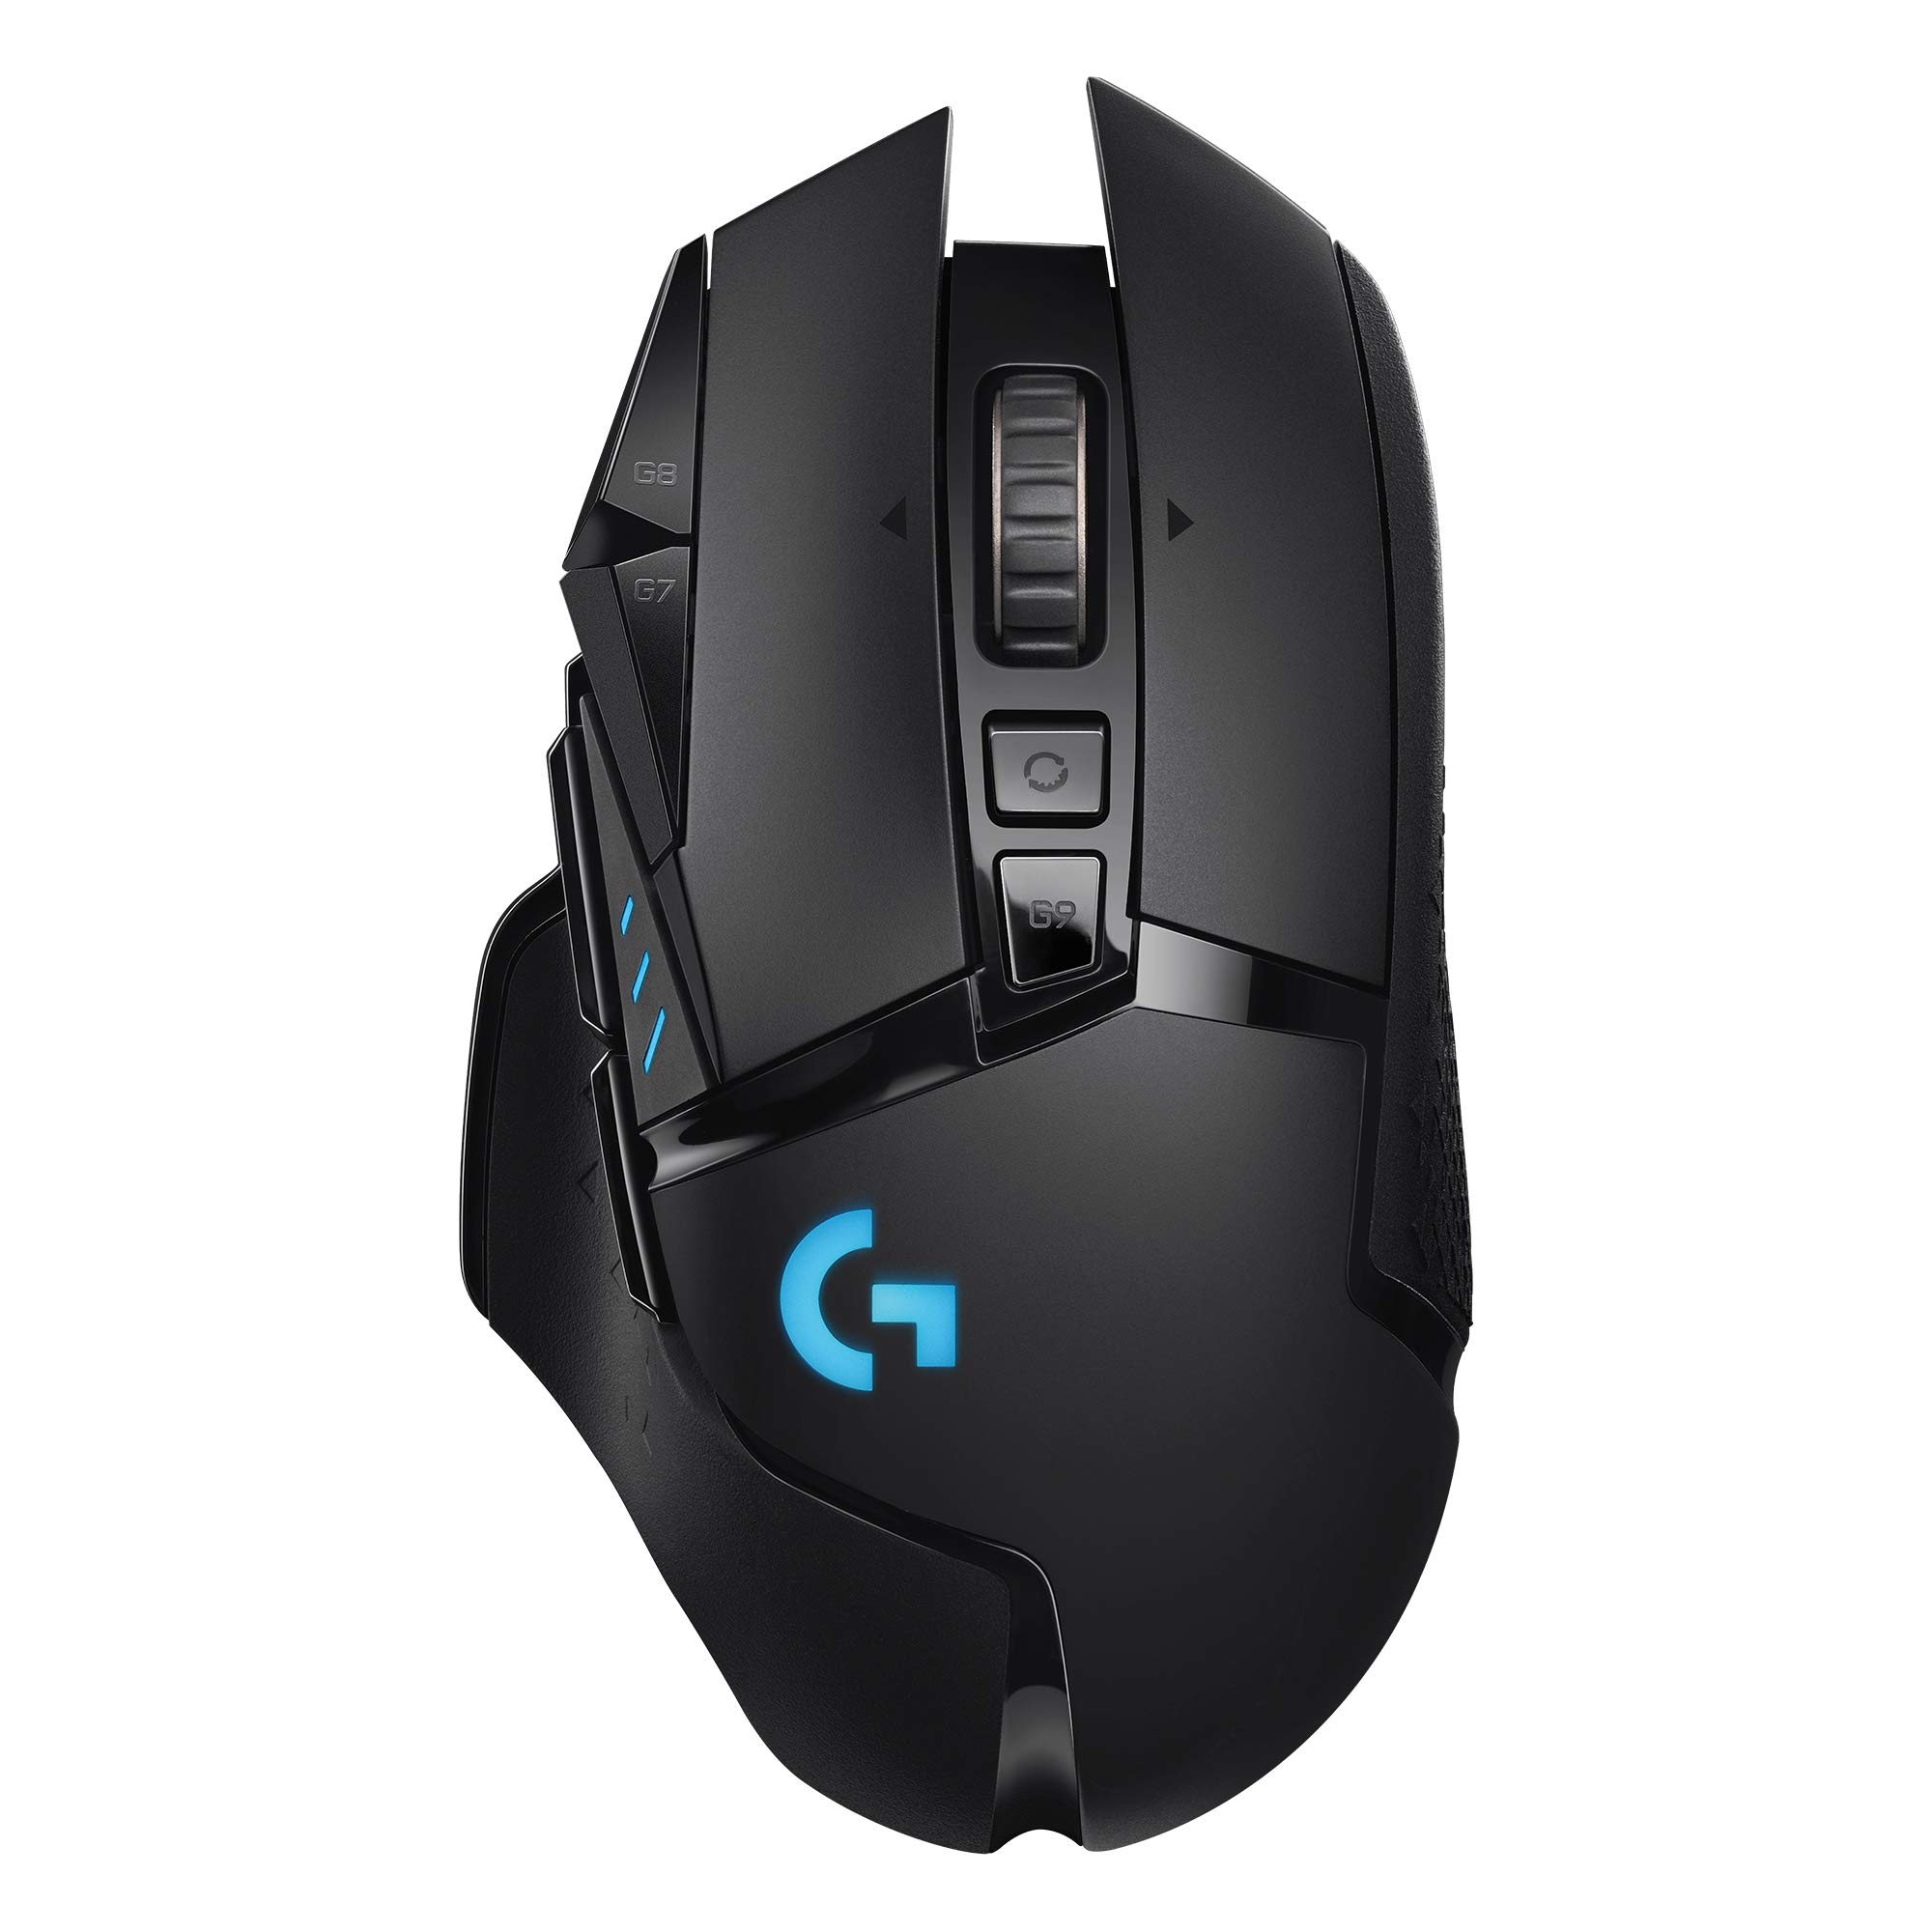 Logitech G915 Wireless Mechanical Gaming Keyboard (Clicky), Black & 502 Lightspeed Wireless Gaming Mouse with Hero 25K Sensor, PowerPlay Compatible, Tunable Weights and Lightsync RGB - Black